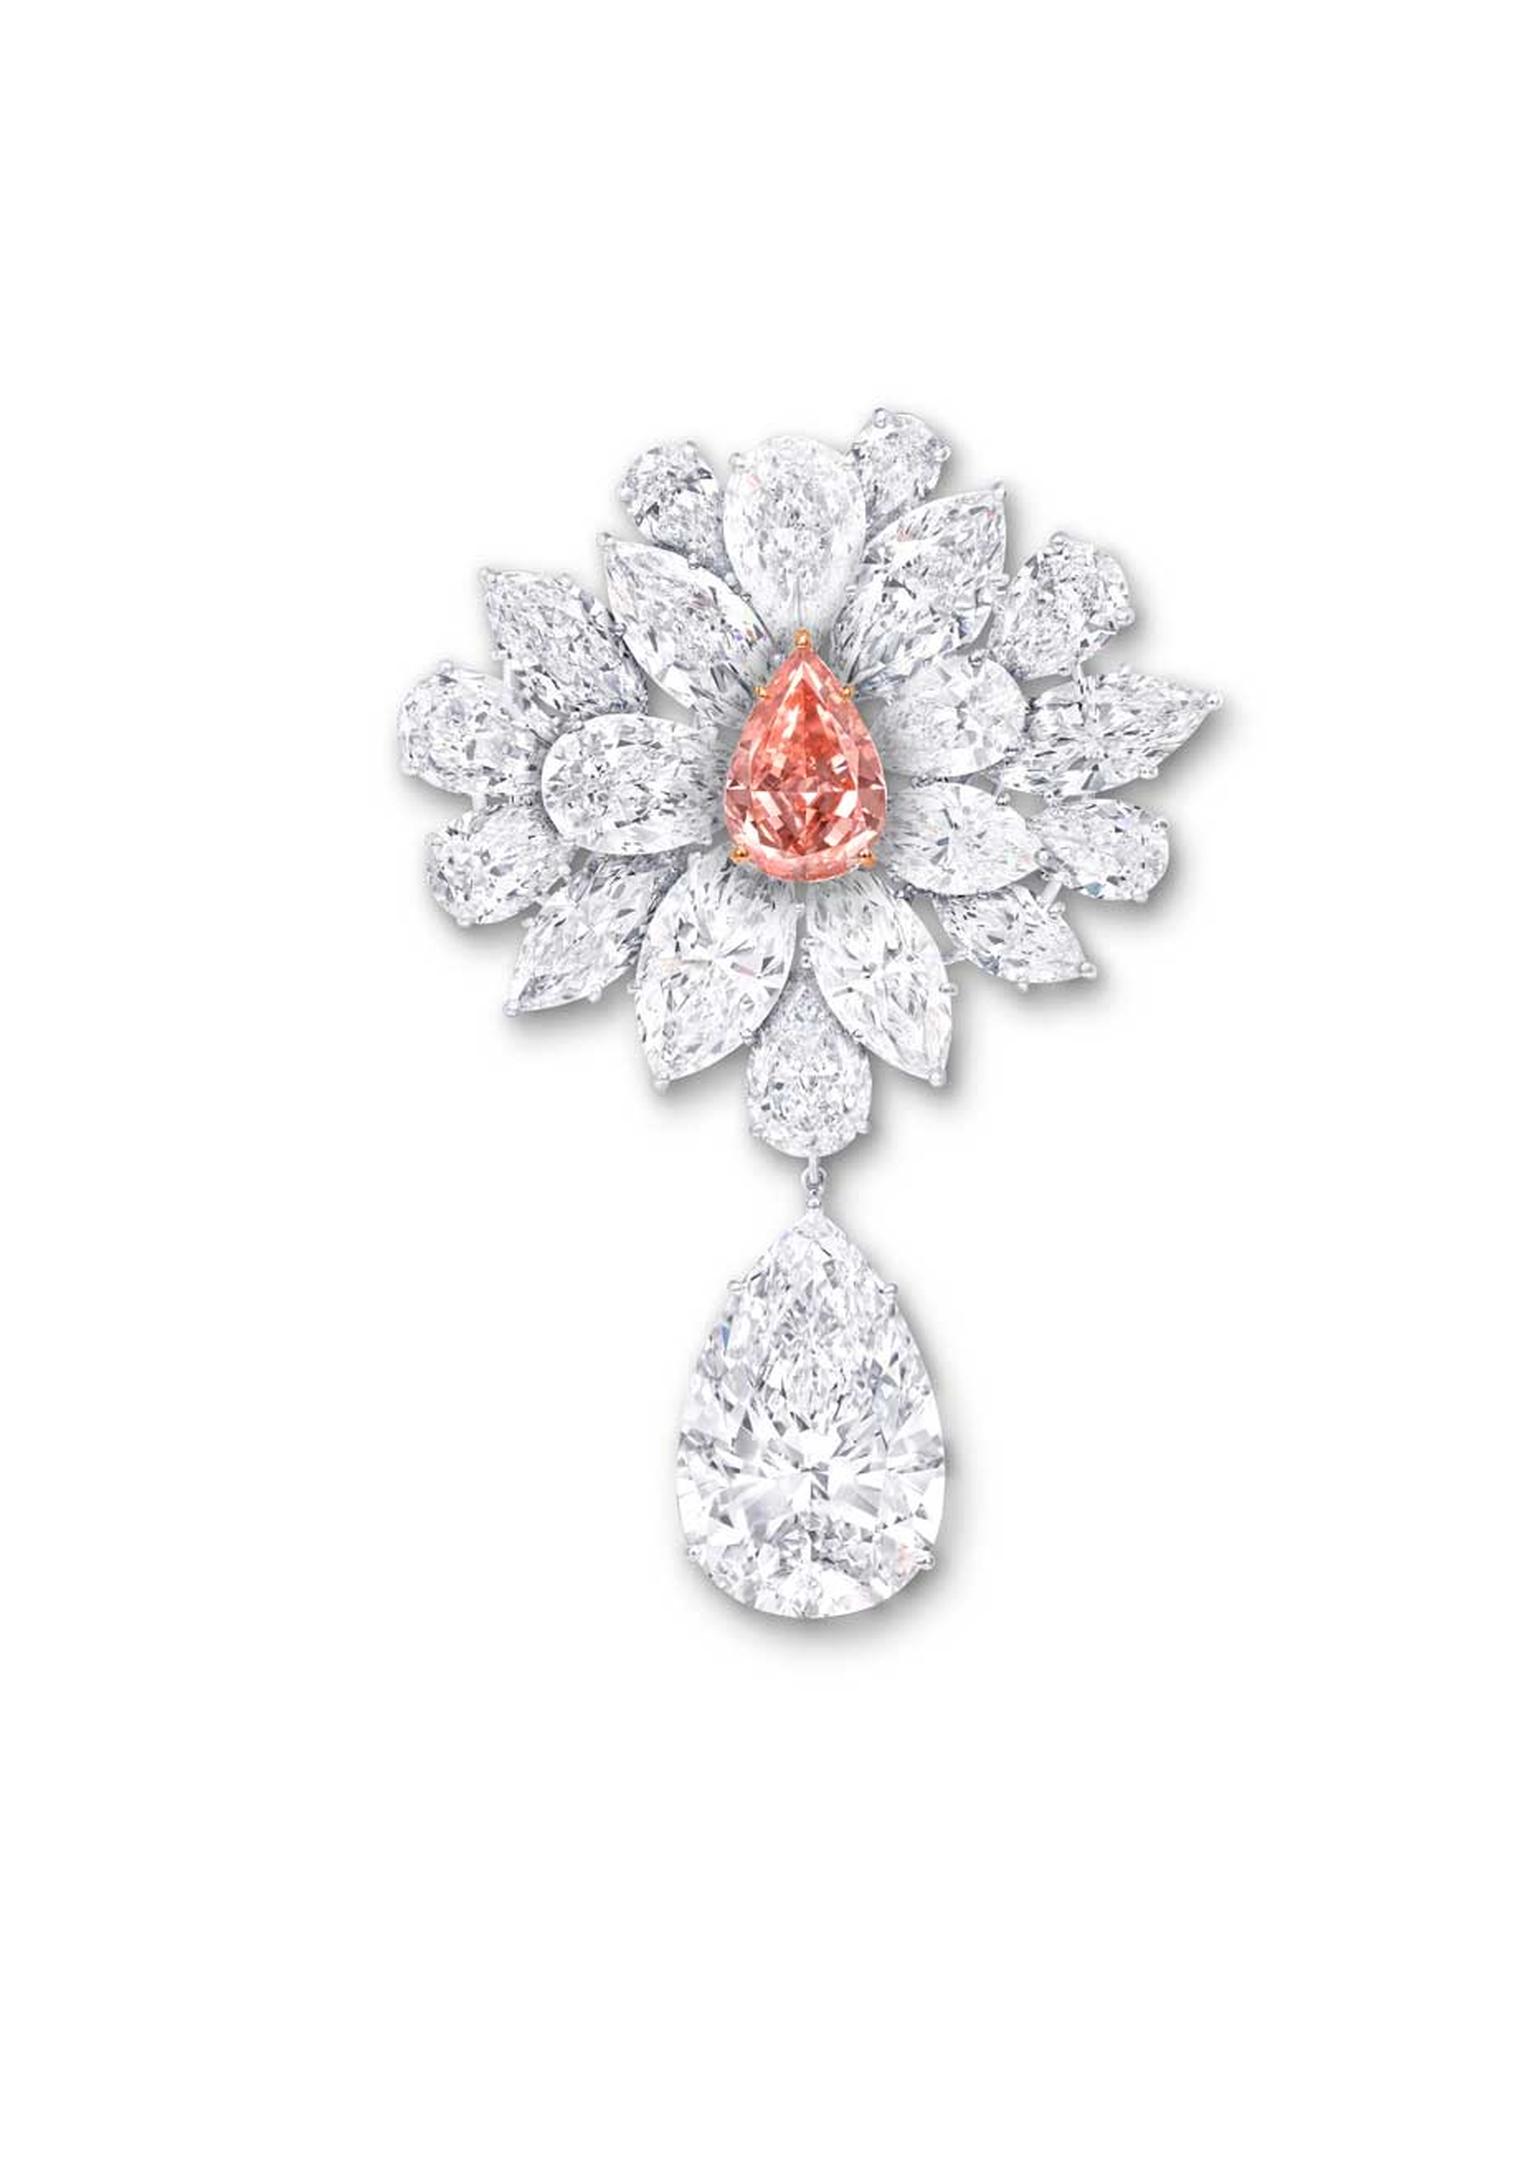 Graff's Diamond Flower Brooch features an 8.97ct pear-shaped Fancy Vivid Pink Orange diamond, surrounded by a spray of white diamond petals and leaves. The brooch is further enhanced with a 38.13ct D Flawless pear-shaped white diamond suspended from a lea